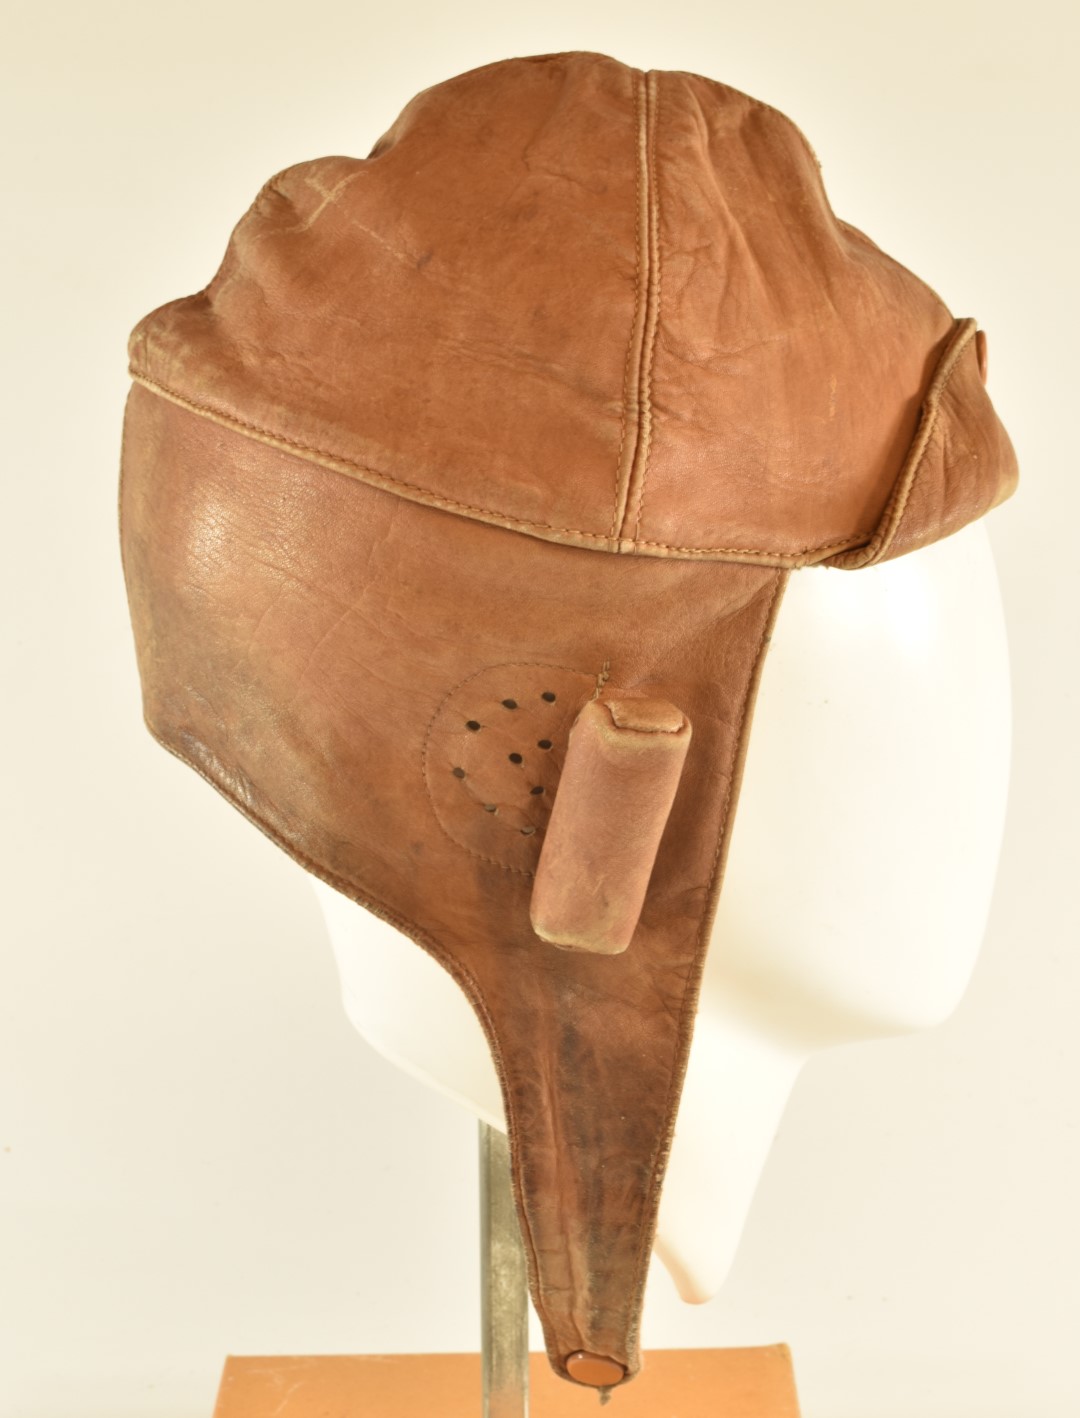 Leather flying helmet, wool lined, with perforated ear sections and protective pads - Image 3 of 6